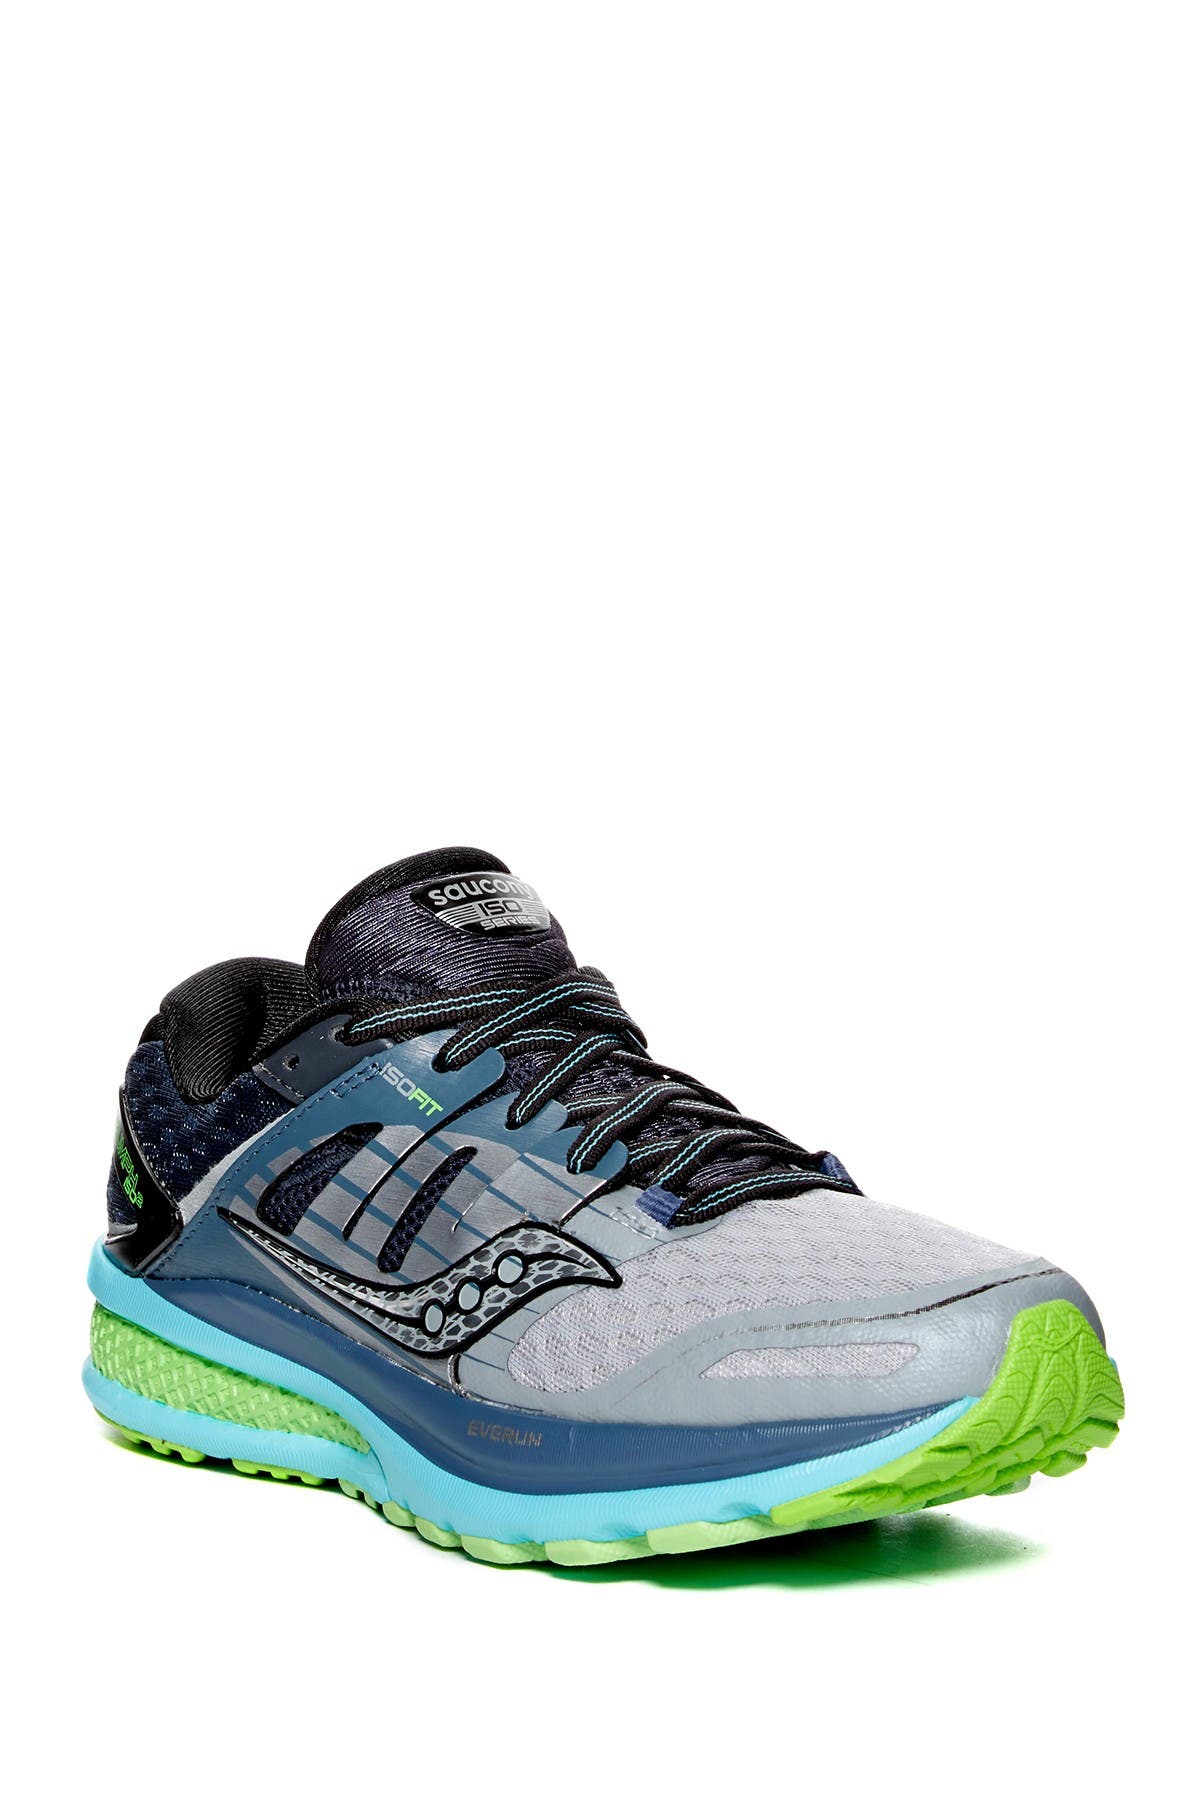 saucony triumph iso 2 women's running shoes